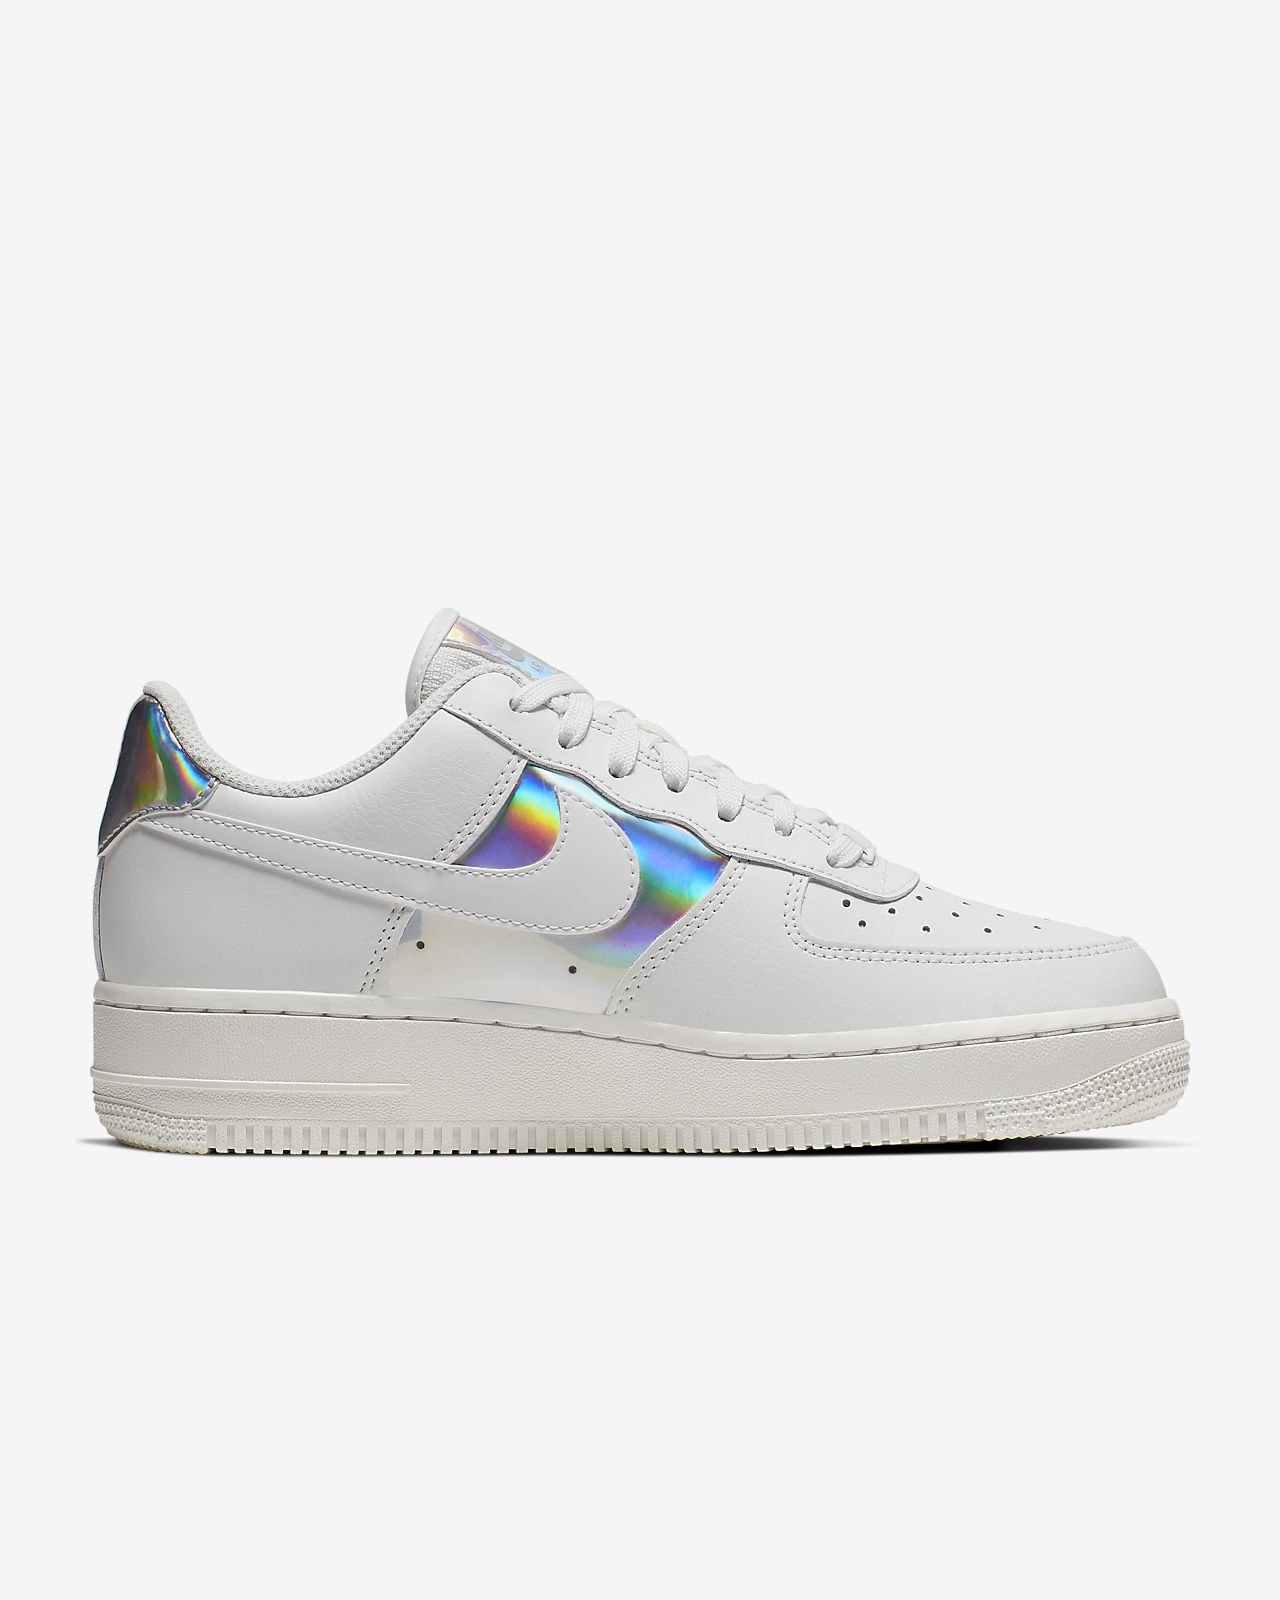 nike air force 1 low femme 2014